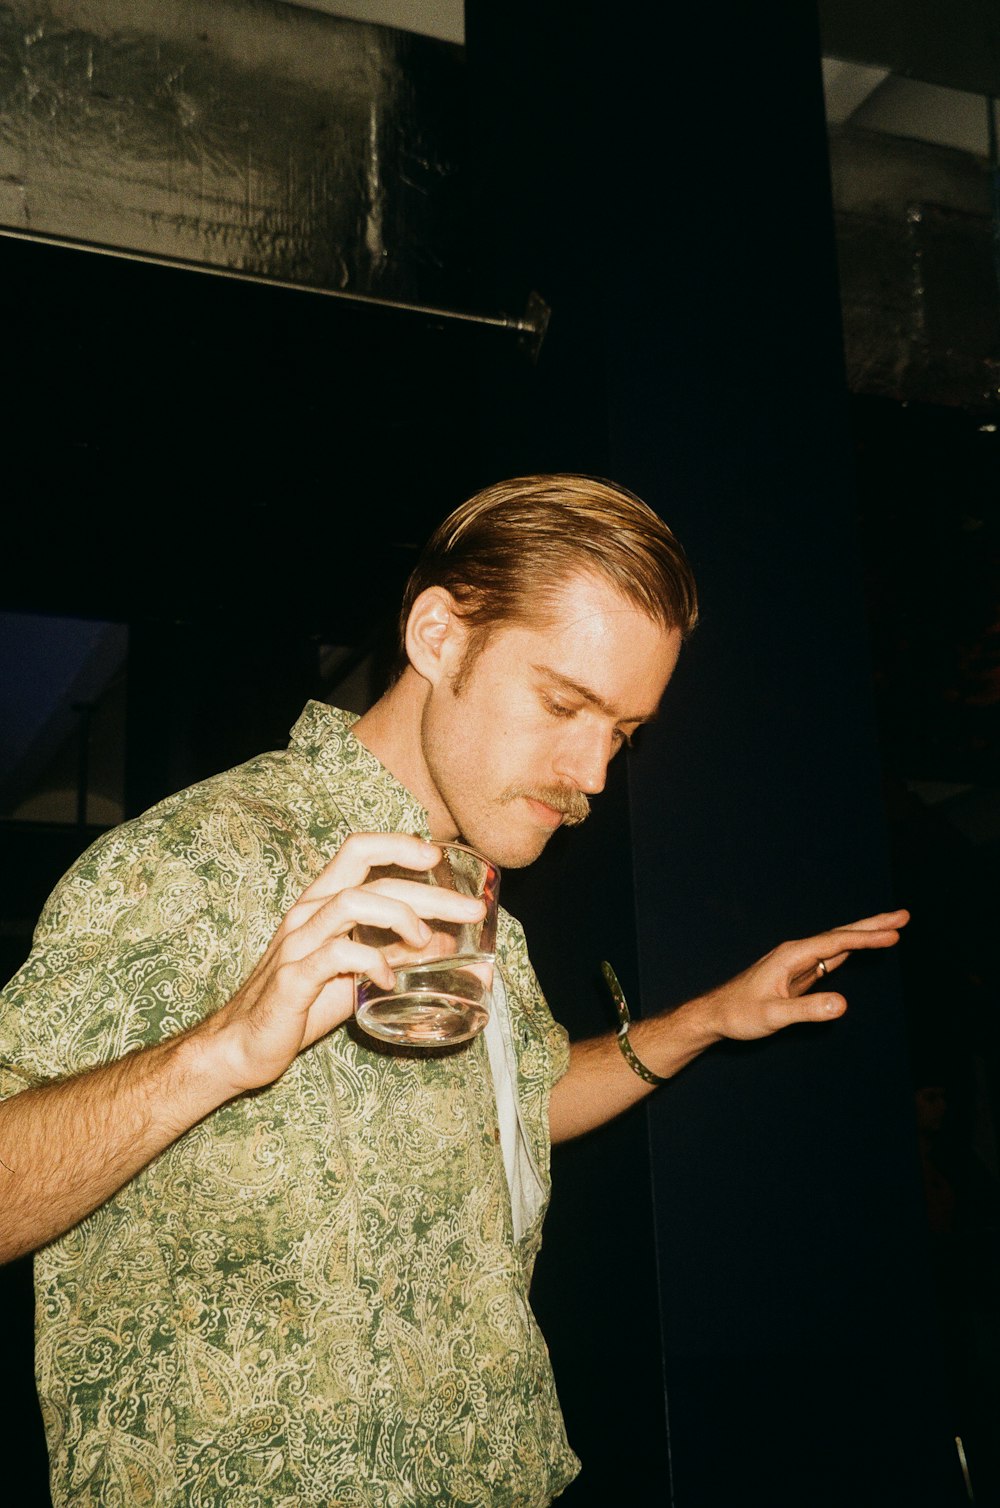 a man in a green shirt holding a wine glass